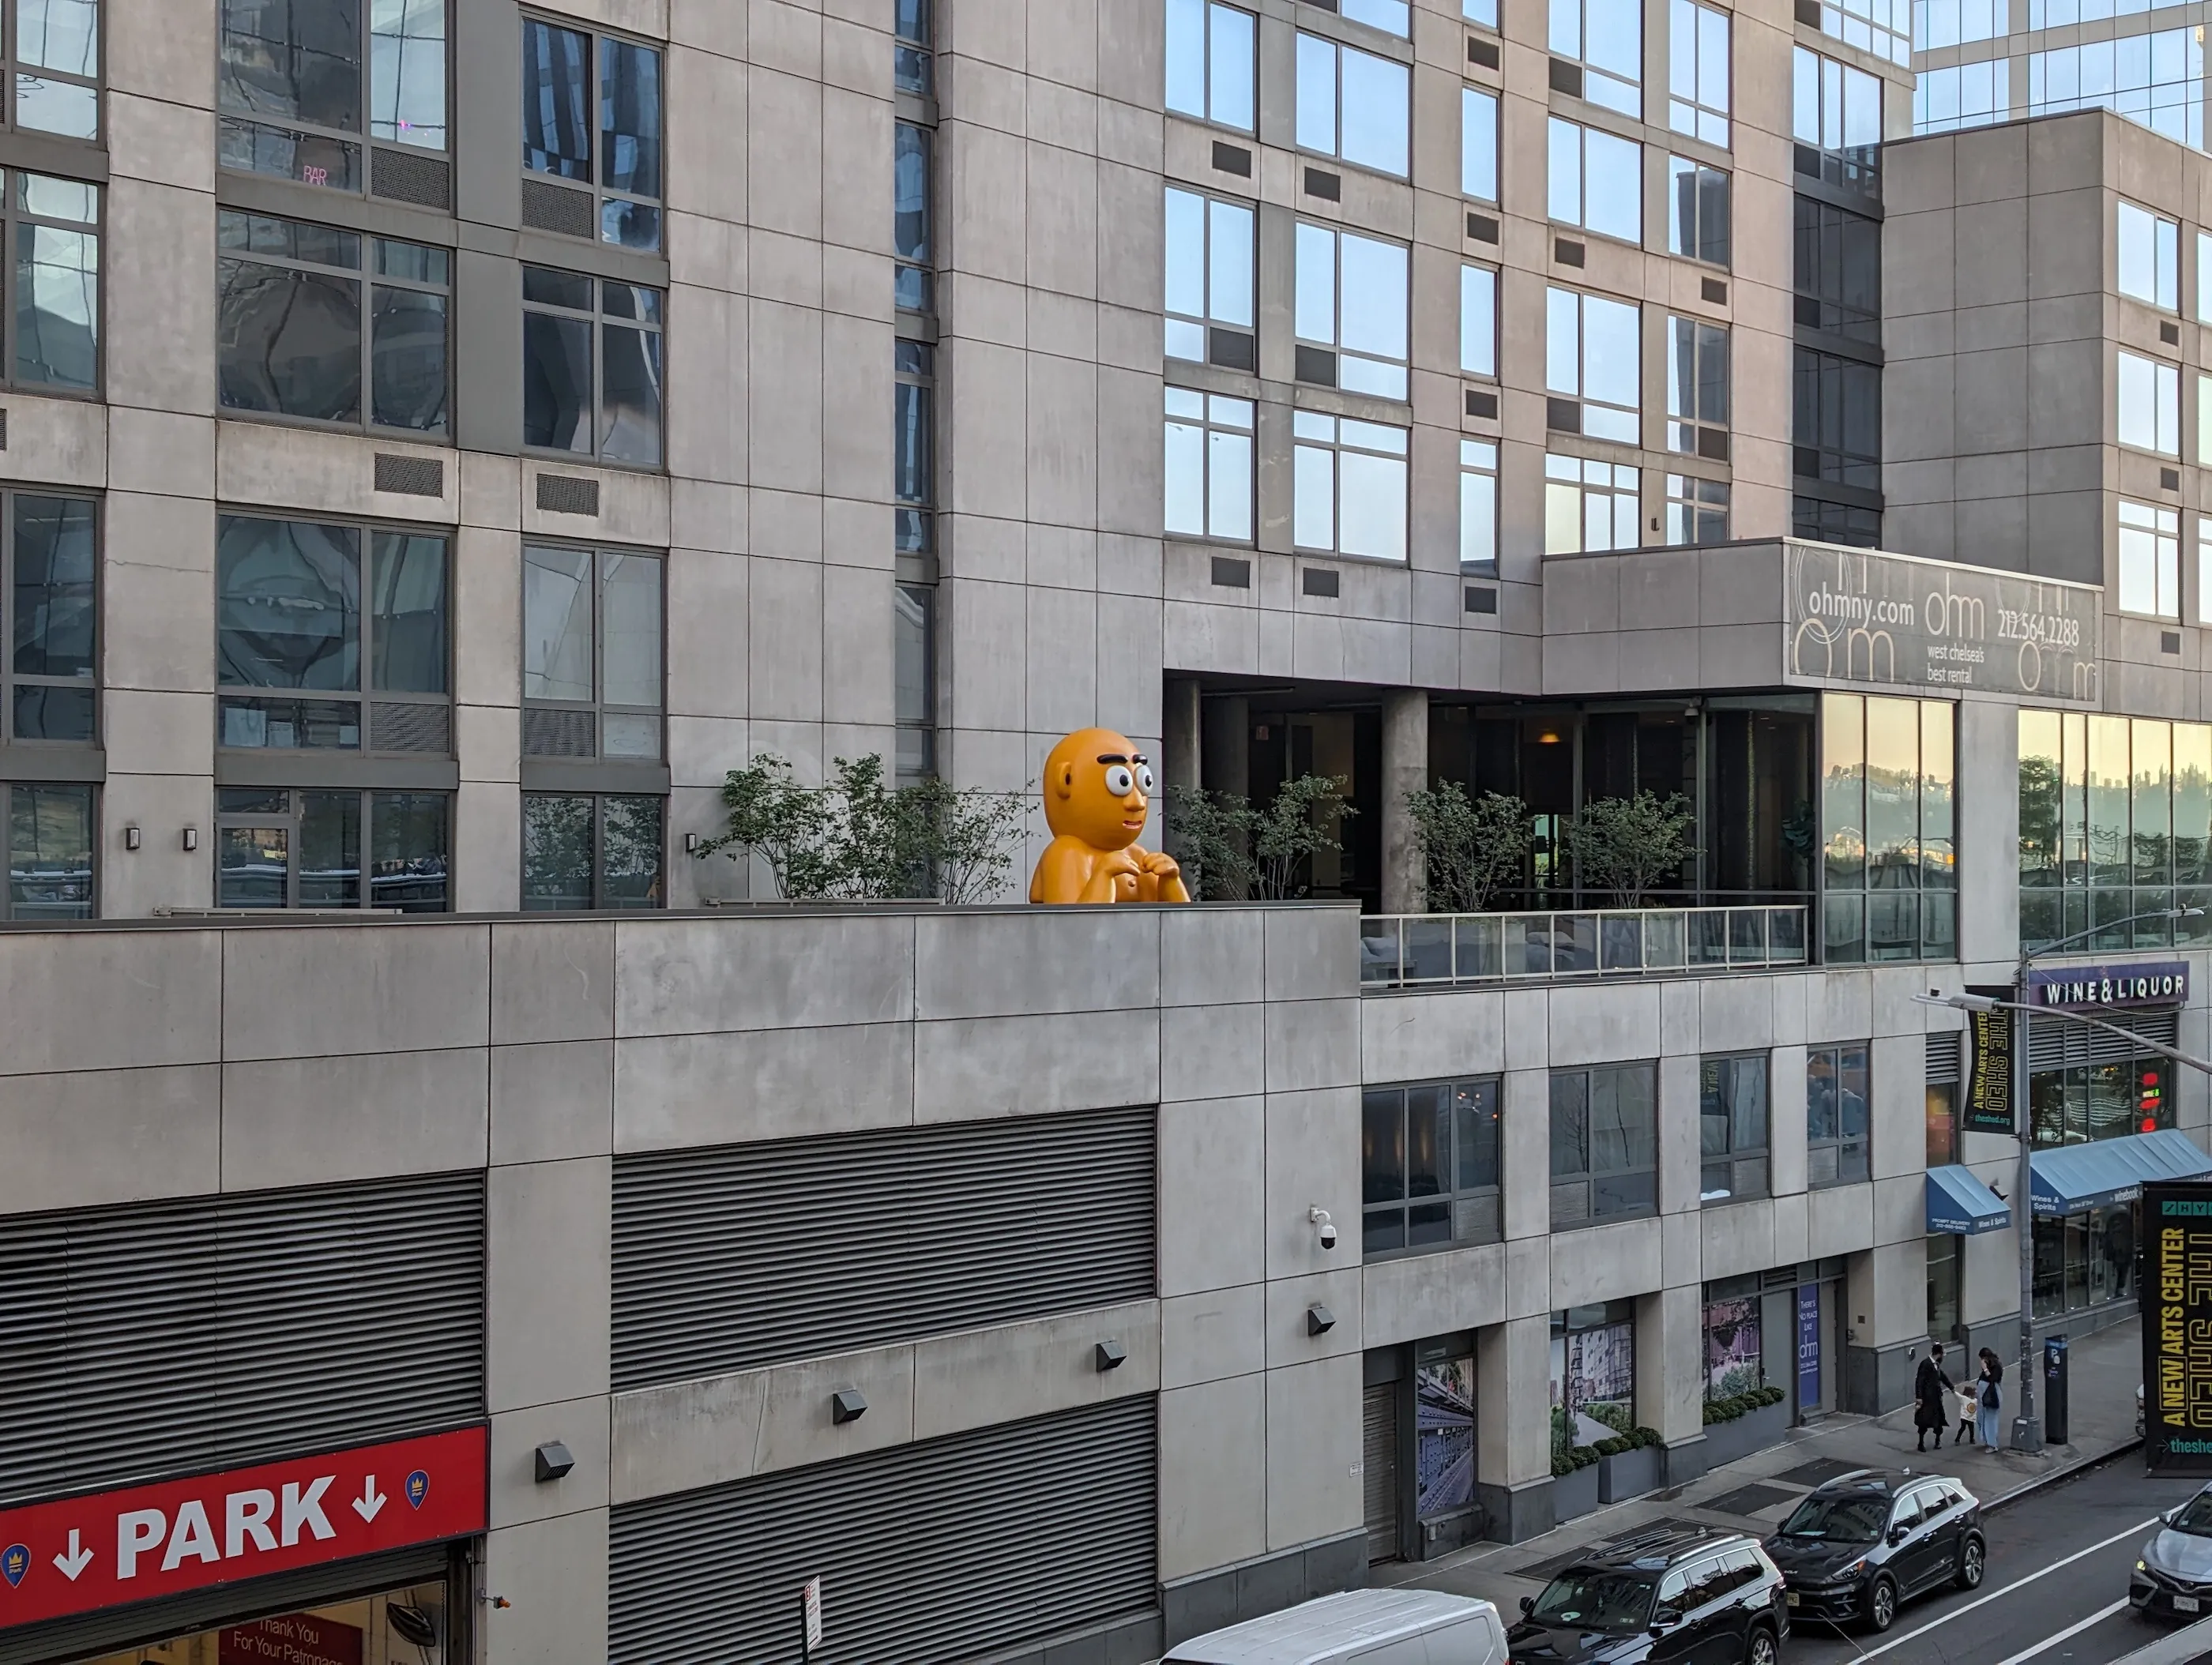 Photo of a yellow statue on a building in NYC, taken with the Google Pixel 8 Pro.